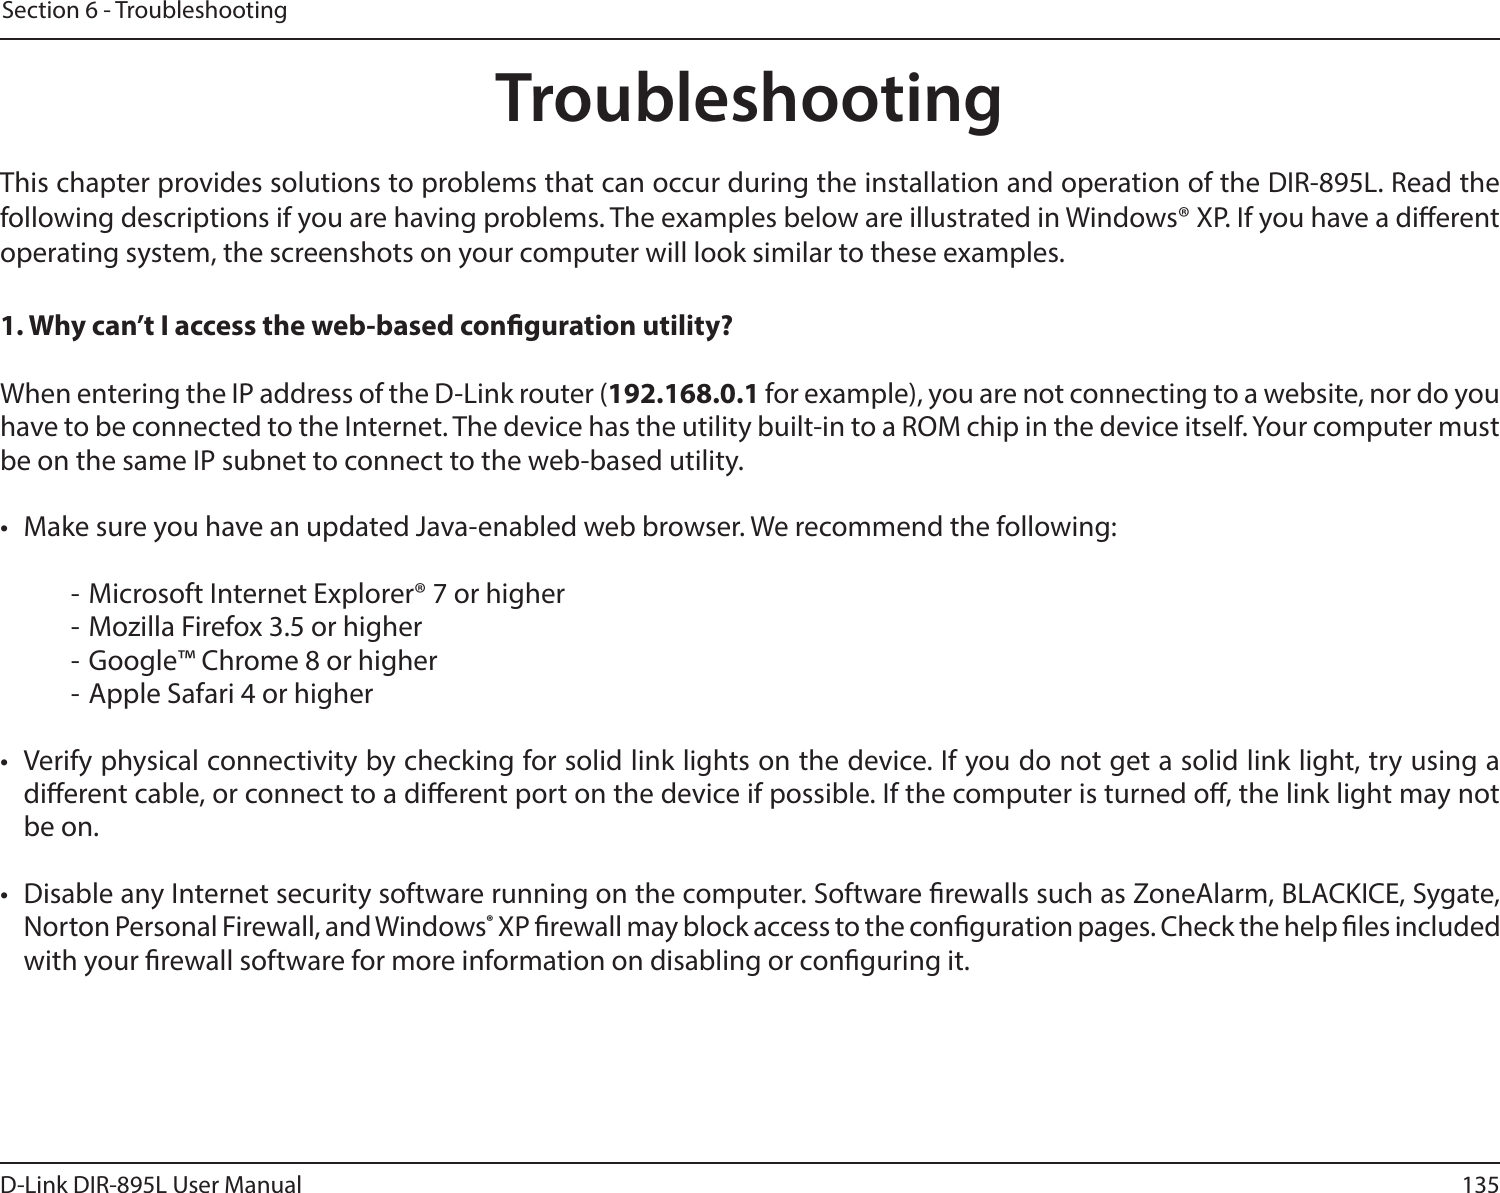 135D-Link DIR-895L User ManualSection 6 - TroubleshootingTroubleshootingThis chapter provides solutions to problems that can occur during the installation and operation of the DIR-895L. Read the following descriptions if you are having problems. The examples below are illustrated in Windows® XP. If you have a dierent operating system, the screenshots on your computer will look similar to these examples.1. Why can’t I access the web-based conguration utility?When entering the IP address of the D-Link router (192.168.0.1 for example), you are not connecting to a website, nor do you have to be connected to the Internet. The device has the utility built-in to a ROM chip in the device itself. Your computer must be on the same IP subnet to connect to the web-based utility. •  Make sure you have an updated Java-enabled web browser. We recommend the following:  - Microsoft Internet Explorer® 7 or higher- Mozilla Firefox 3.5 or higher- Google™ Chrome 8 or higher- Apple Safari 4 or higher•  Verify physical connectivity by checking for solid link lights on the device. If you do not get a solid link light, try using a dierent cable, or connect to a dierent port on the device if possible. If the computer is turned o, the link light may not be on.•  Disable any Internet security software running on the computer. Software rewalls such as ZoneAlarm, BLACKICE, Sygate, Norton Personal Firewall, and Windows® XP rewall may block access to the conguration pages. Check the help les included with your rewall software for more information on disabling or conguring it.